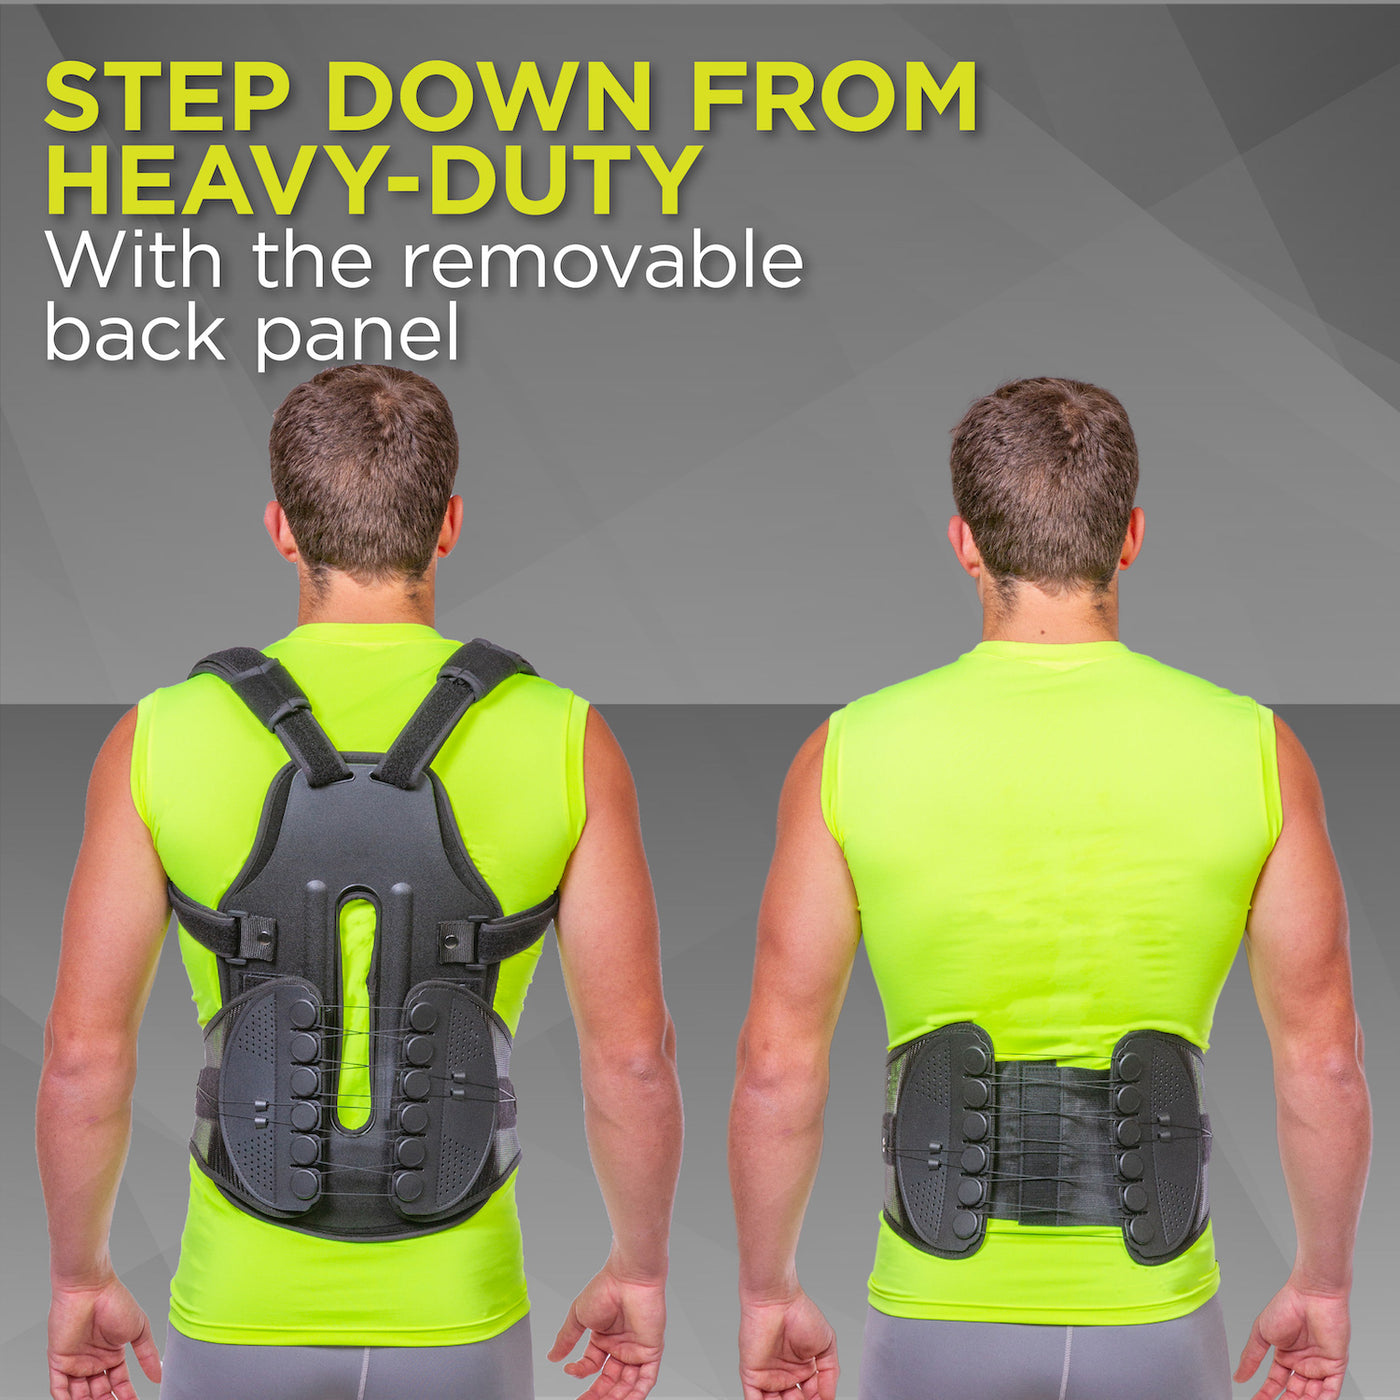 The scoliosis back brace has a removable panel to allow the brace to be worn for step down treatment